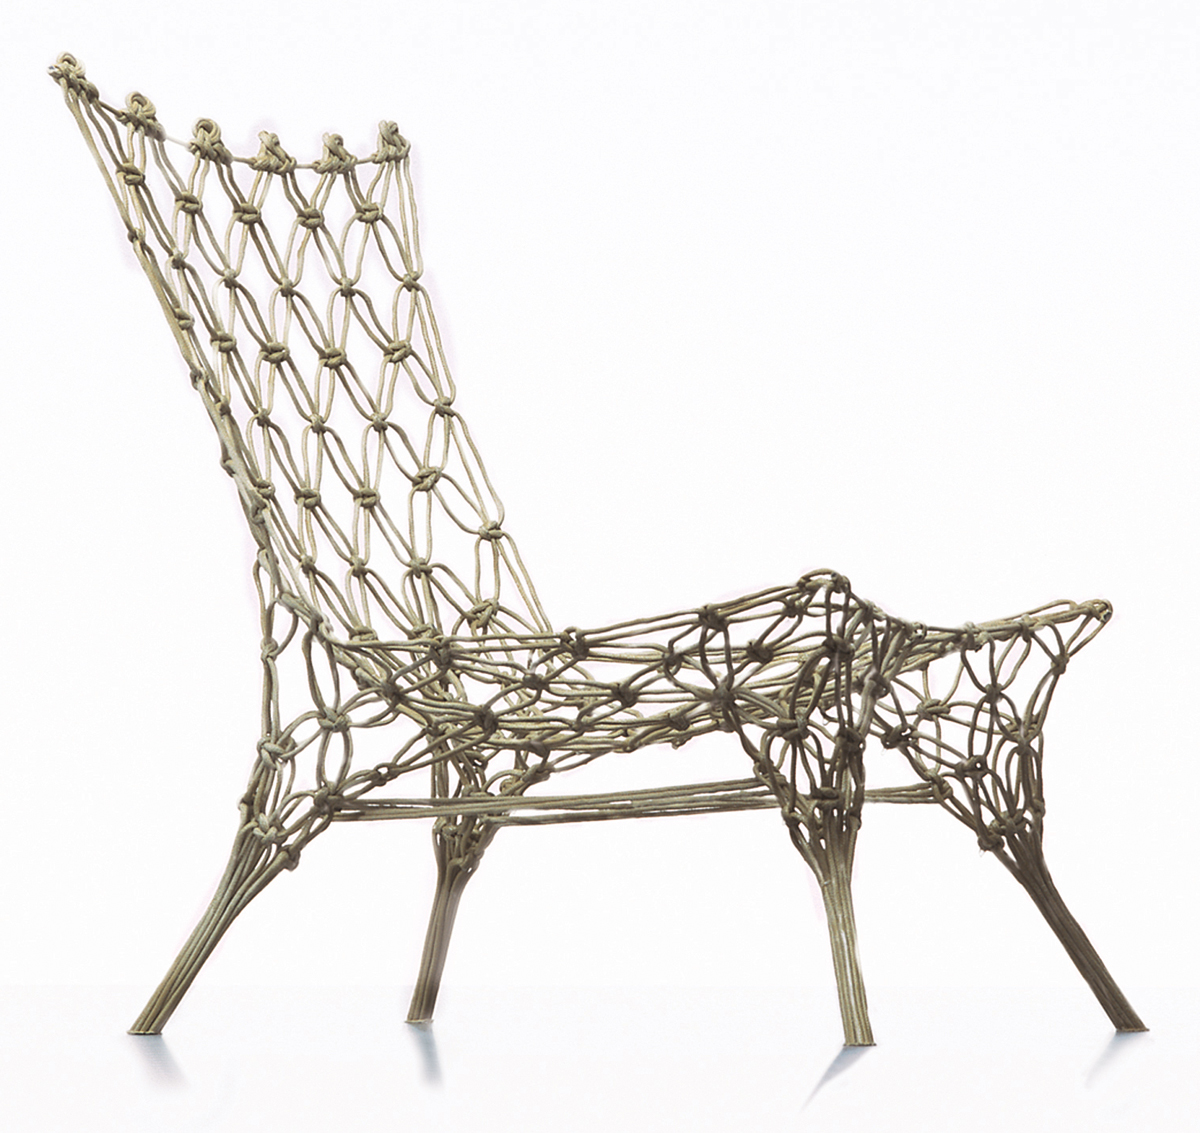 Knotted Chair Marcel Wanders